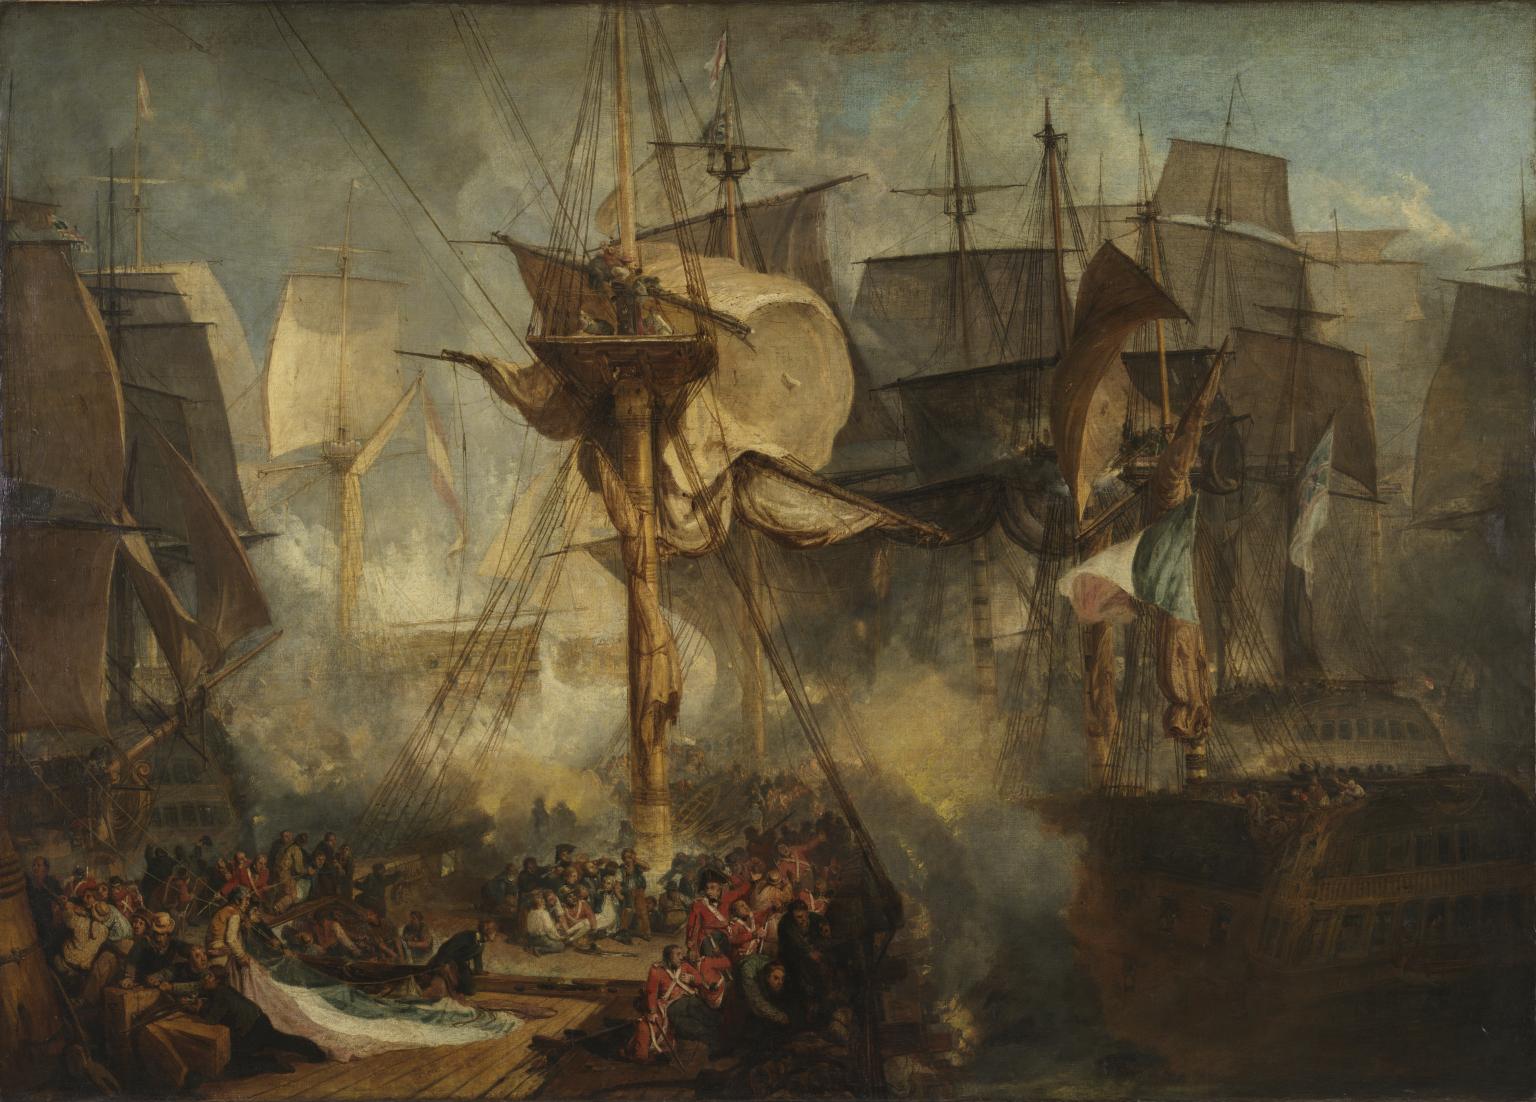 N00480: The Battle of Trafalgar, as Seen from the Mizen Starboard Shrouds of the Victory